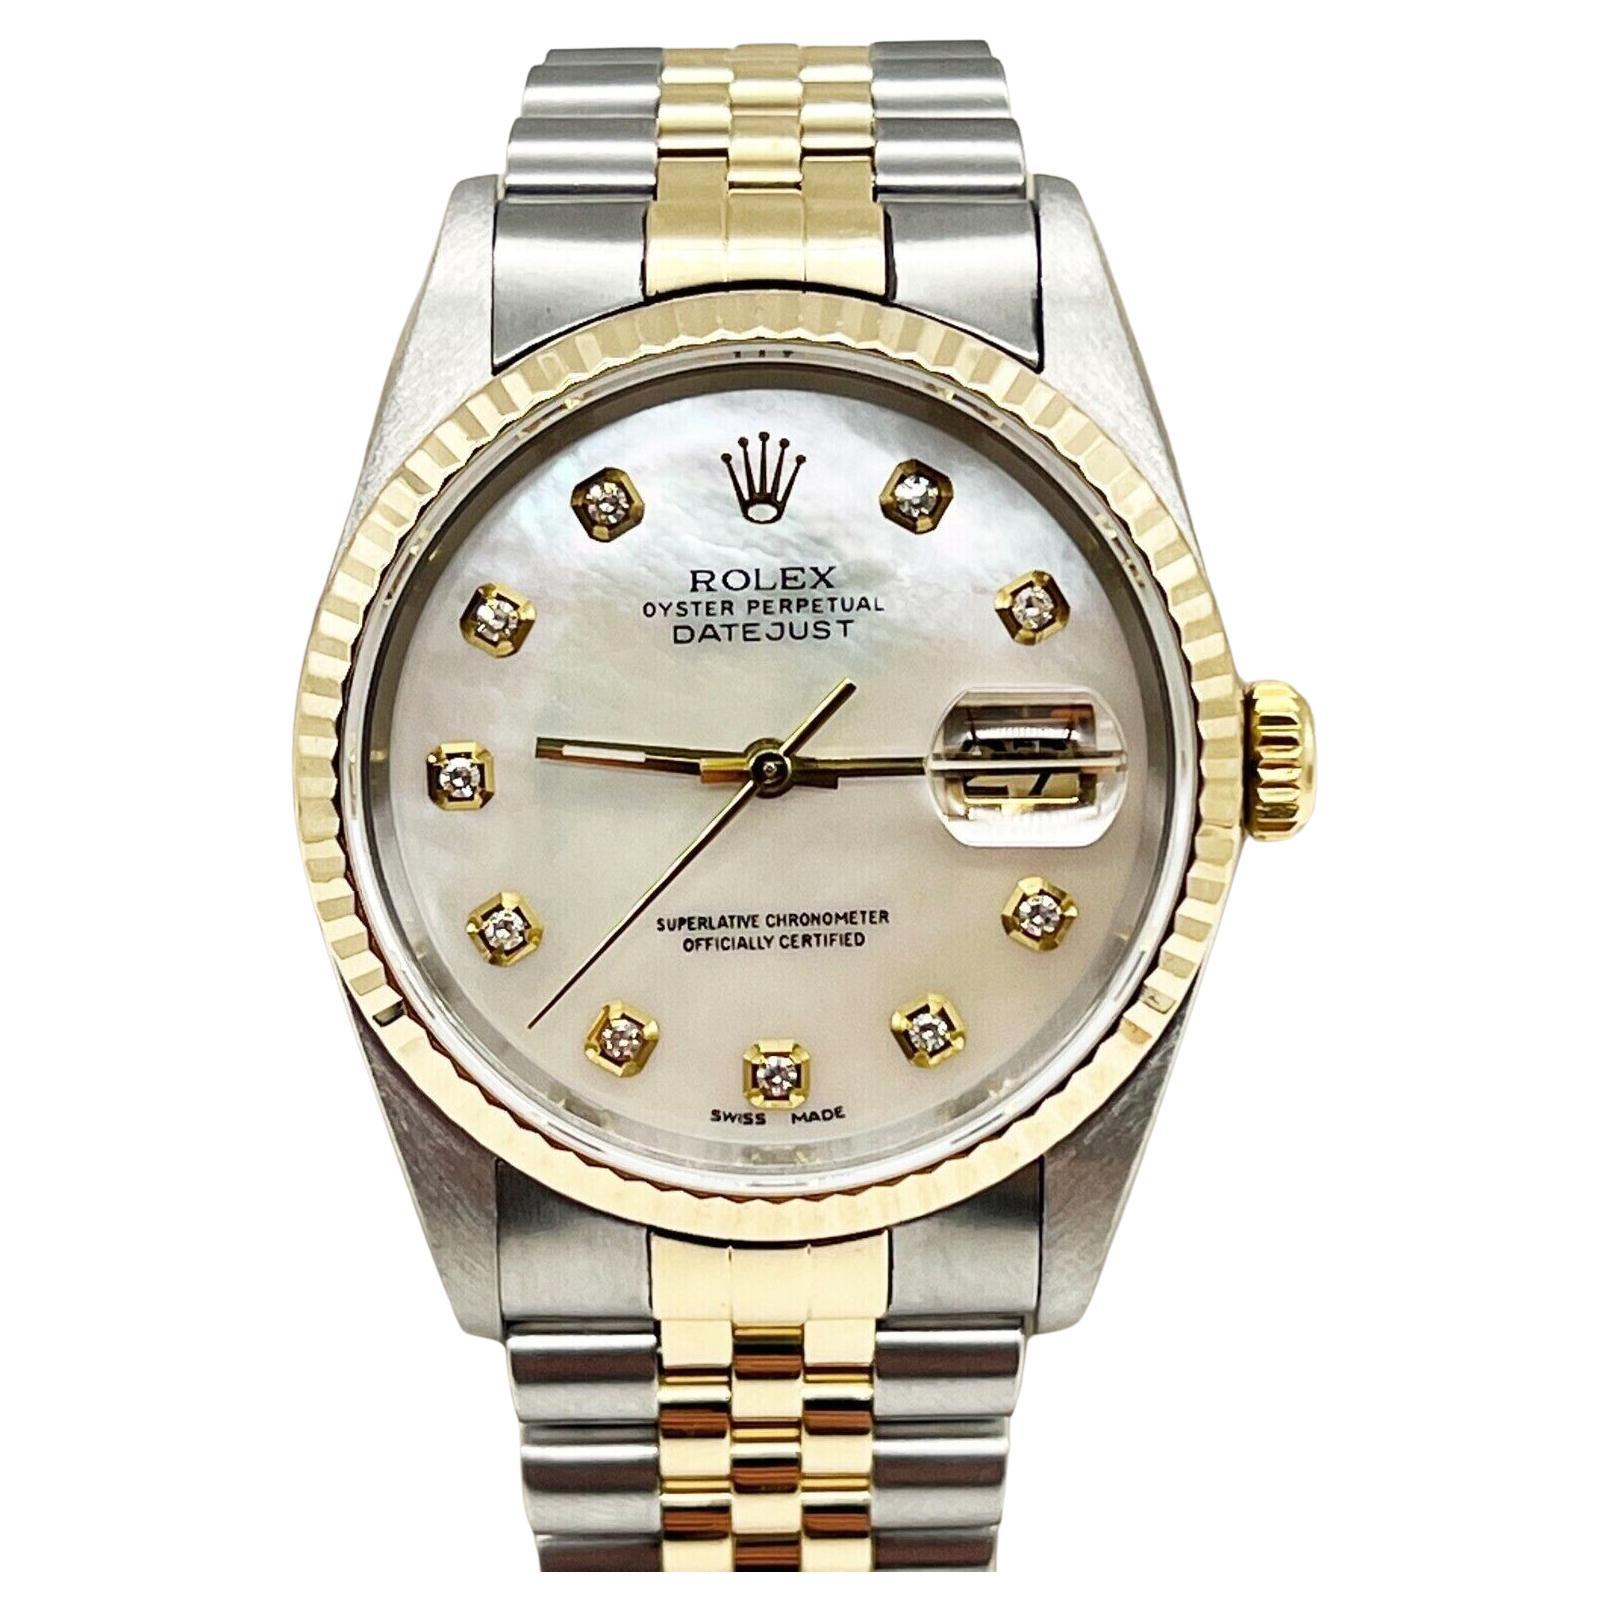 Rolex 16233 Datejust MOP Diamond Dial 18K Yellow Gold Stainless Steel